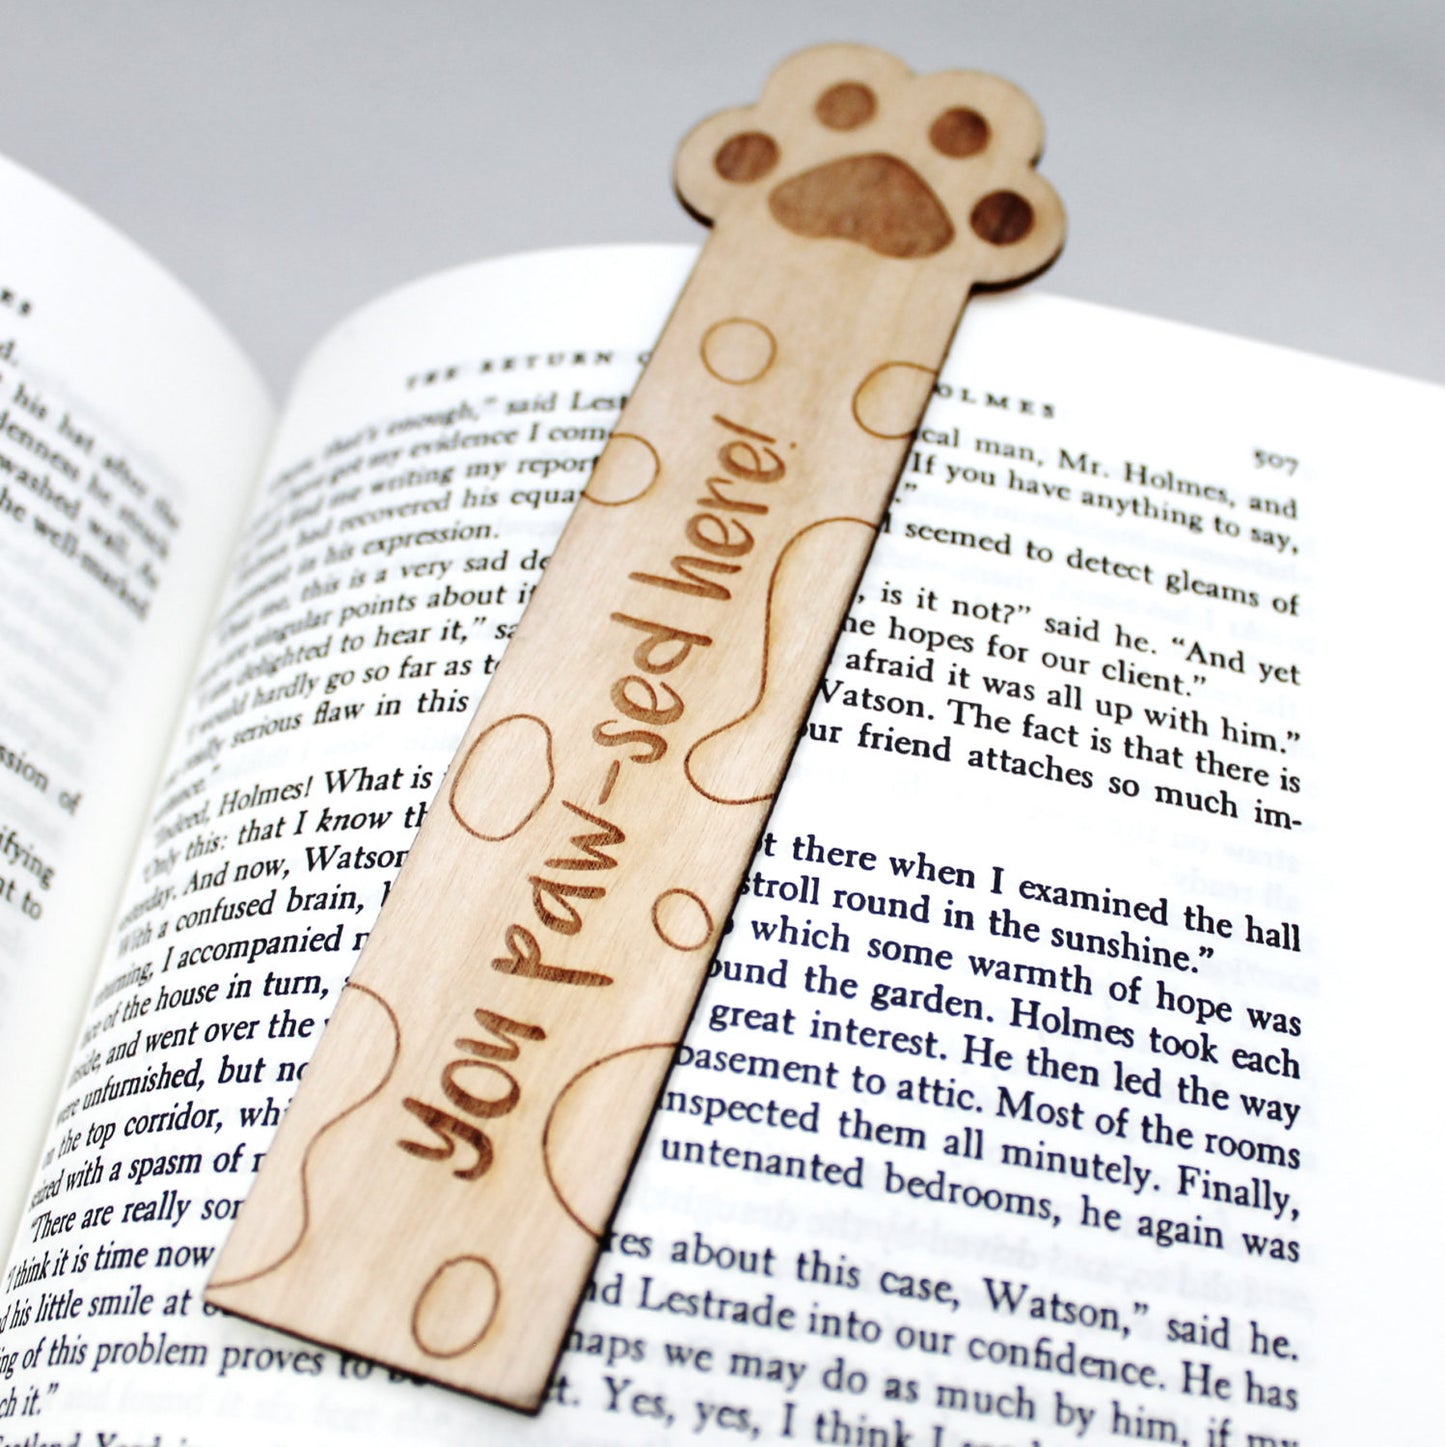 Wooden Paw Print 'You Paw-sed here' Cat Dog Animal Bookmark